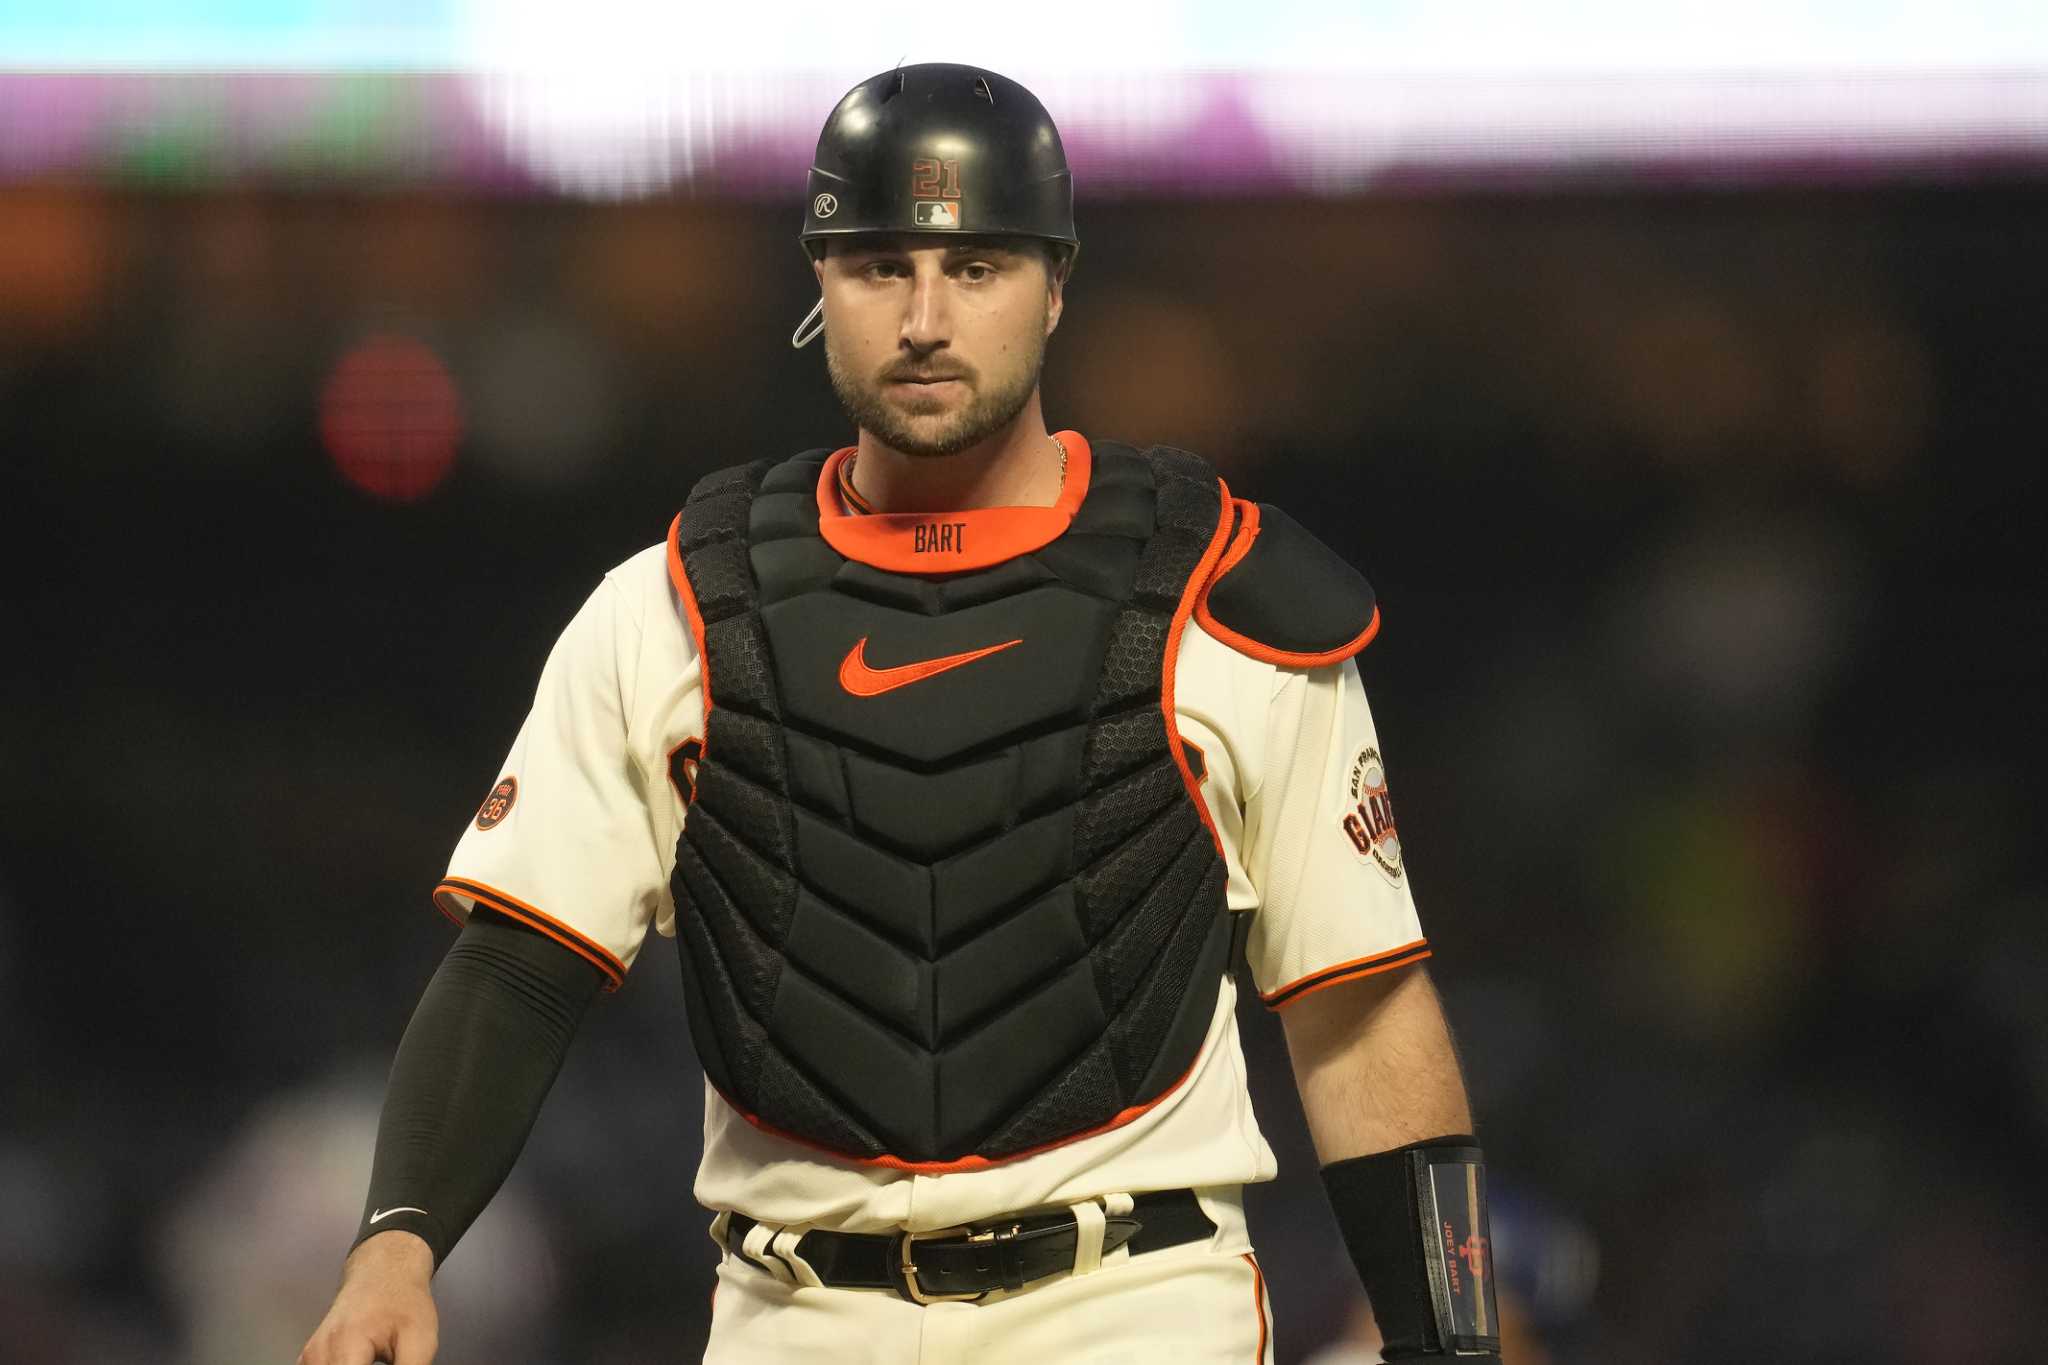 What if Joey Bart was the Giants' answer at catcher all along?